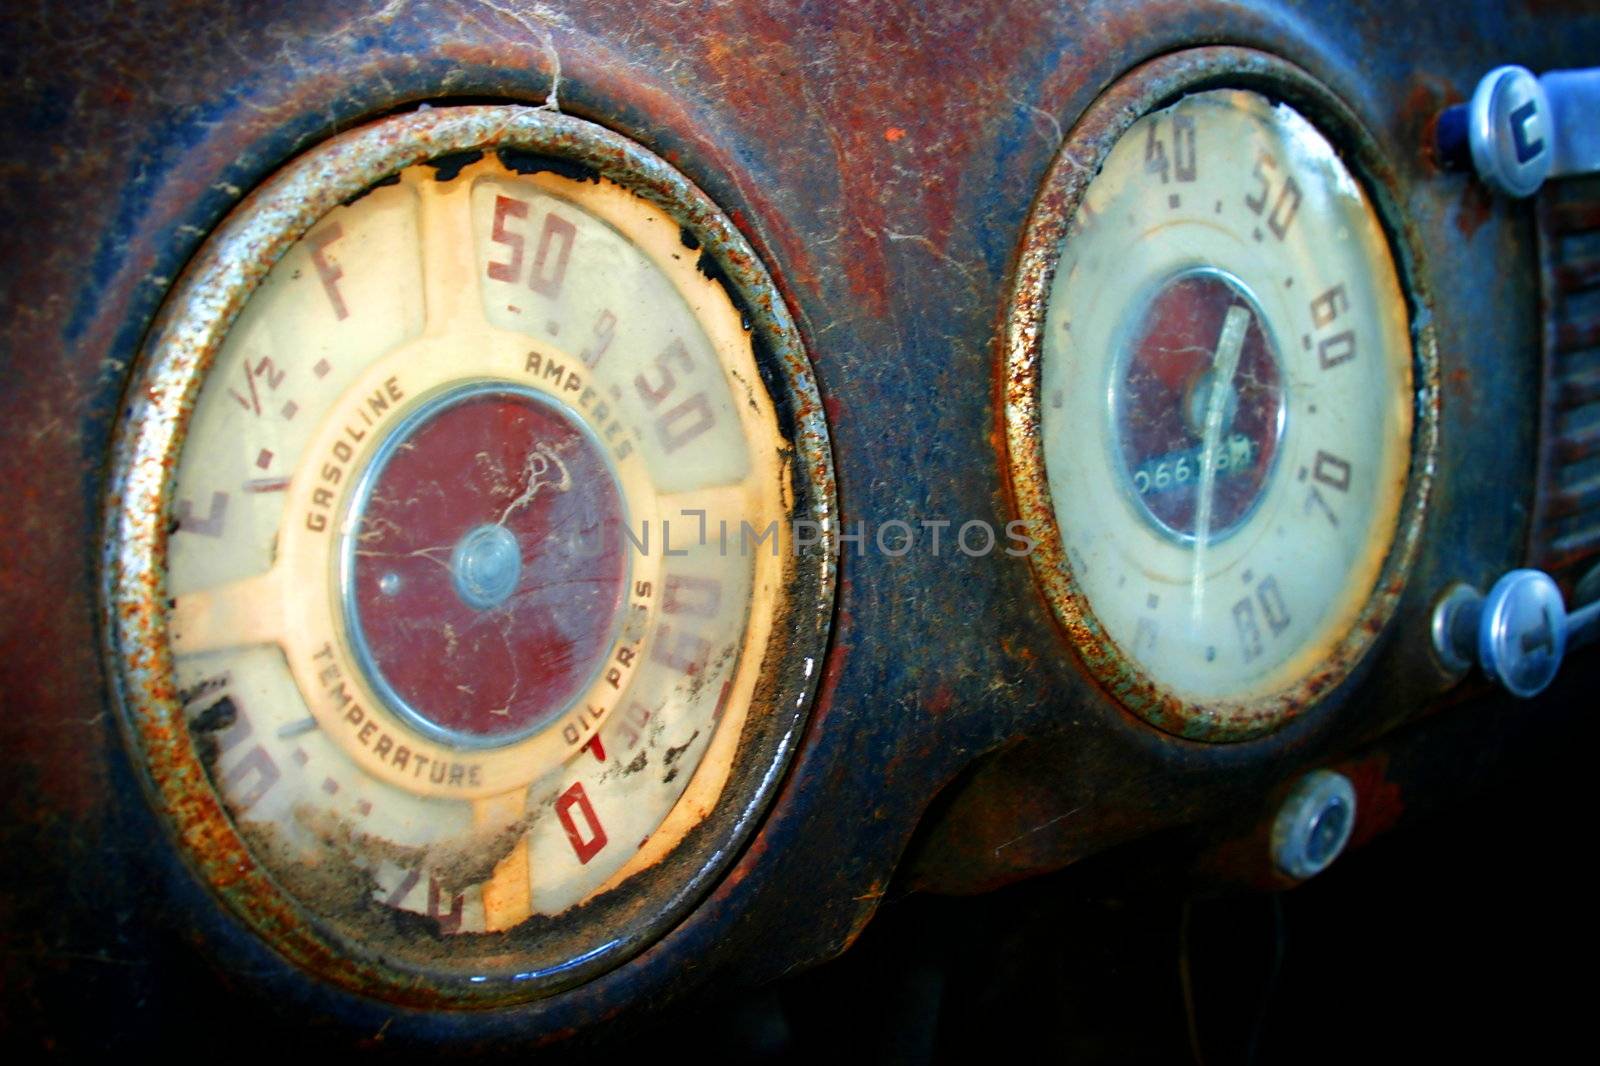 An old Chevrolet that I found at the side of a road. I like the texture of the rust in the photo.